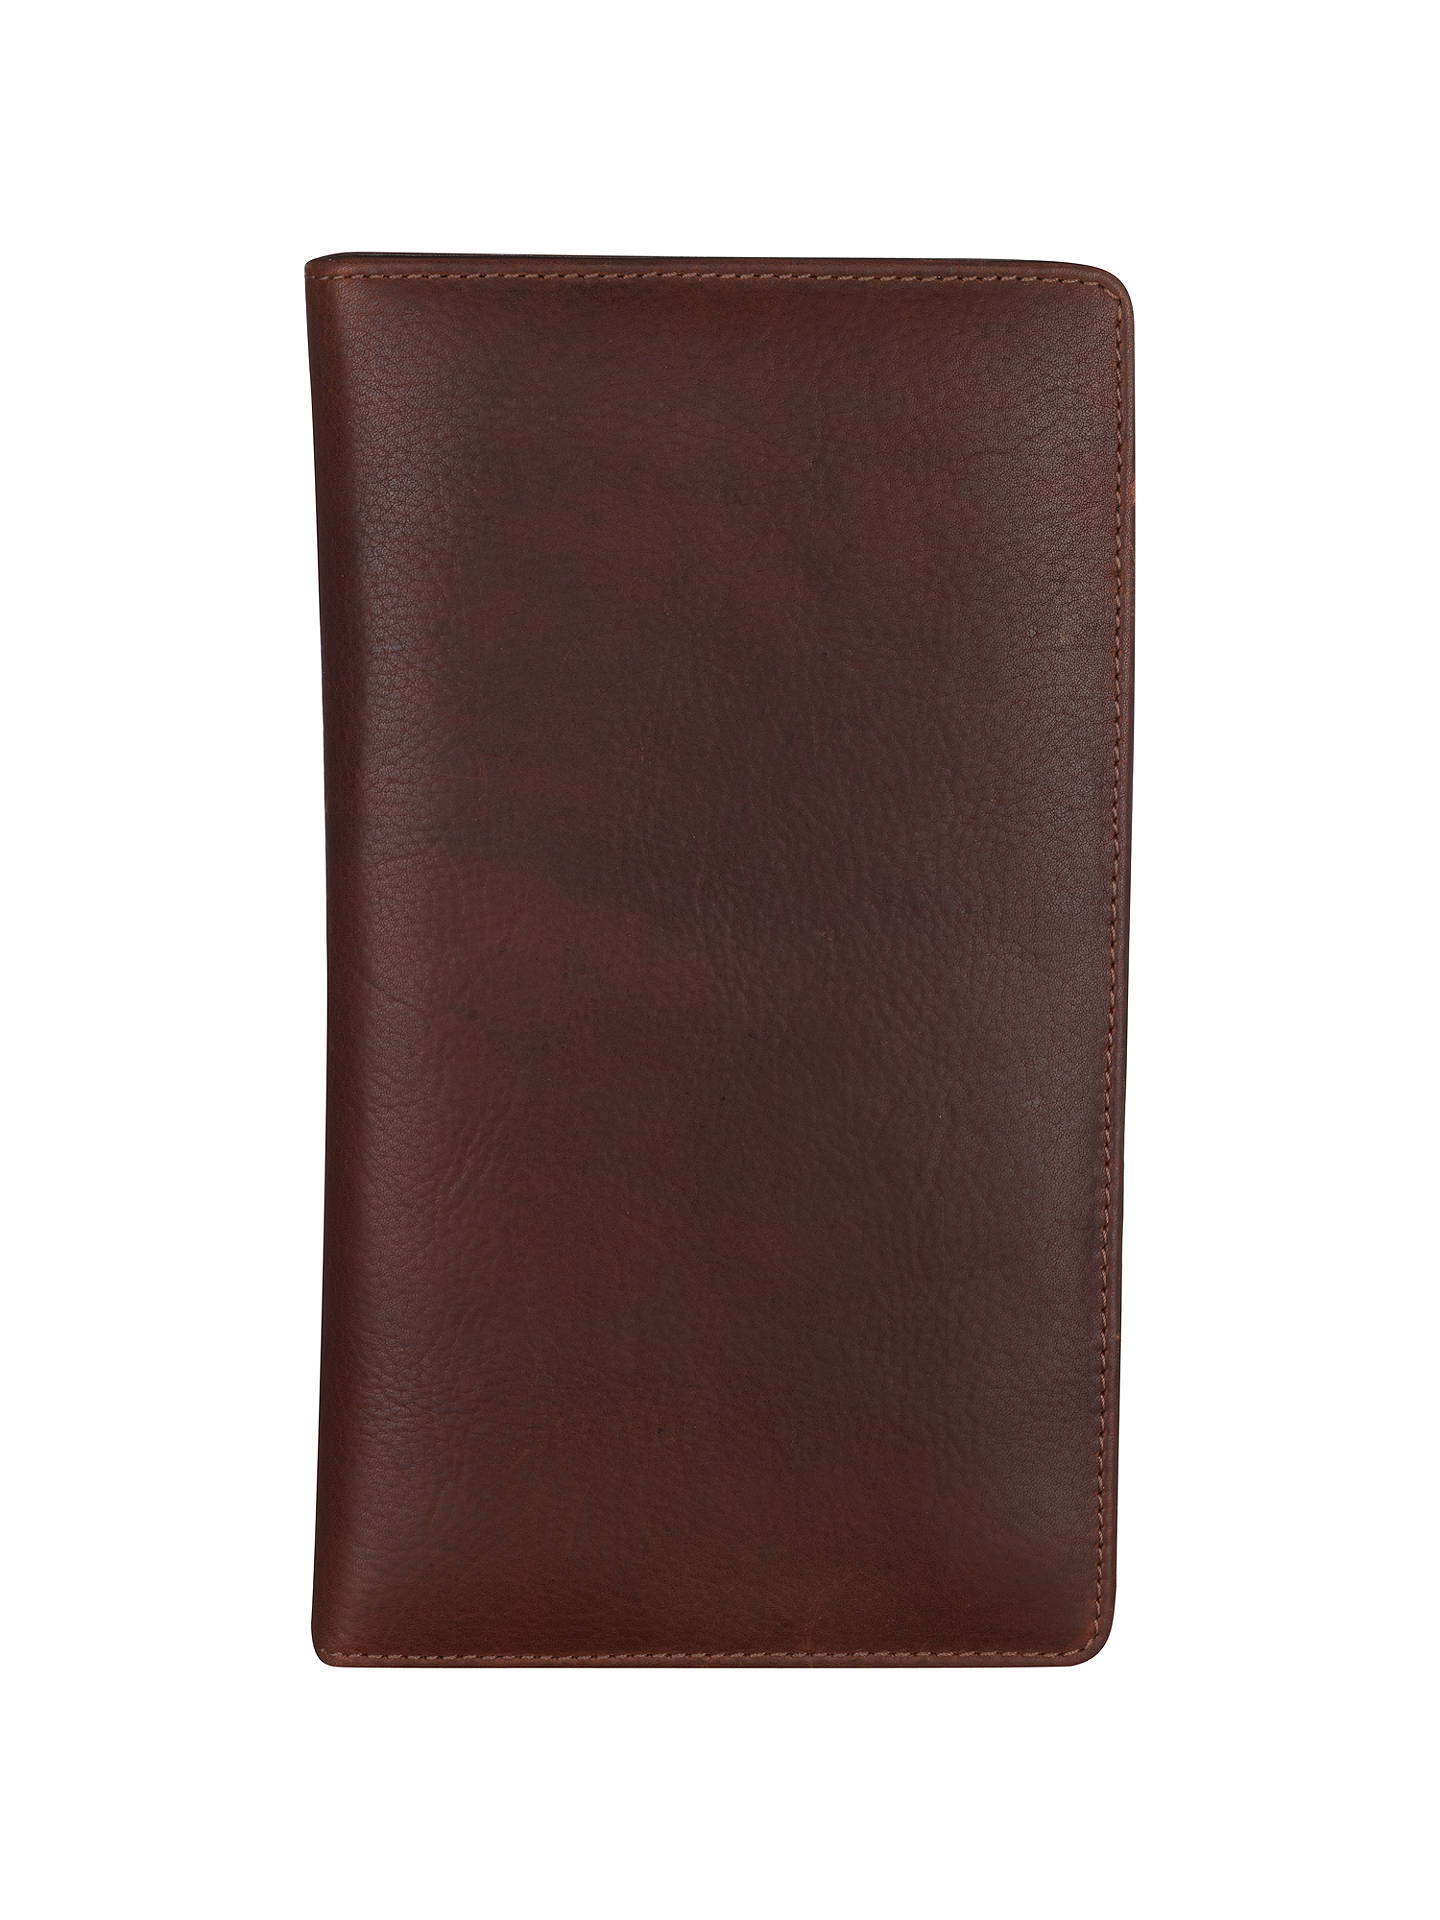 wh smith travel wallet